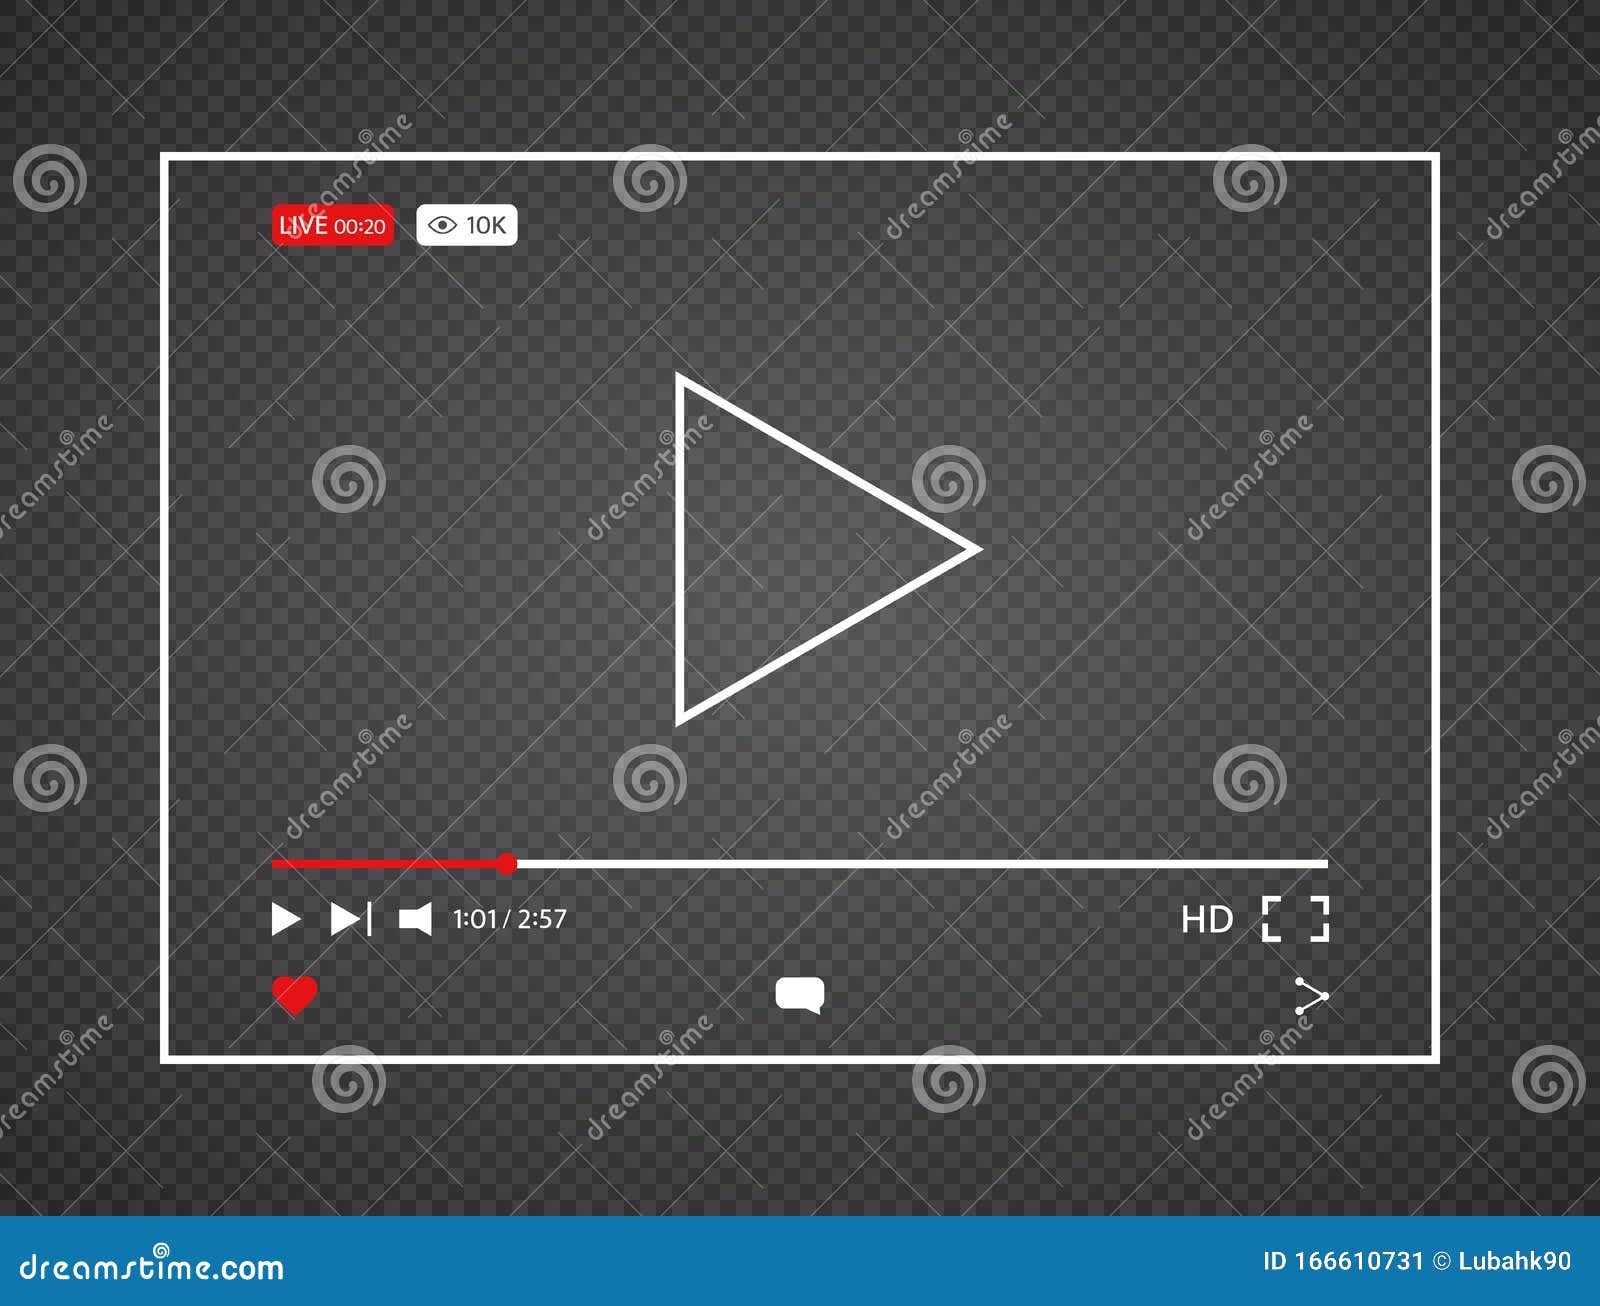 Video Player. Live Stream Video Background with 10k Views. Interface Web  Screen Template Stock Vector - Illustration of digital, background:  166610731